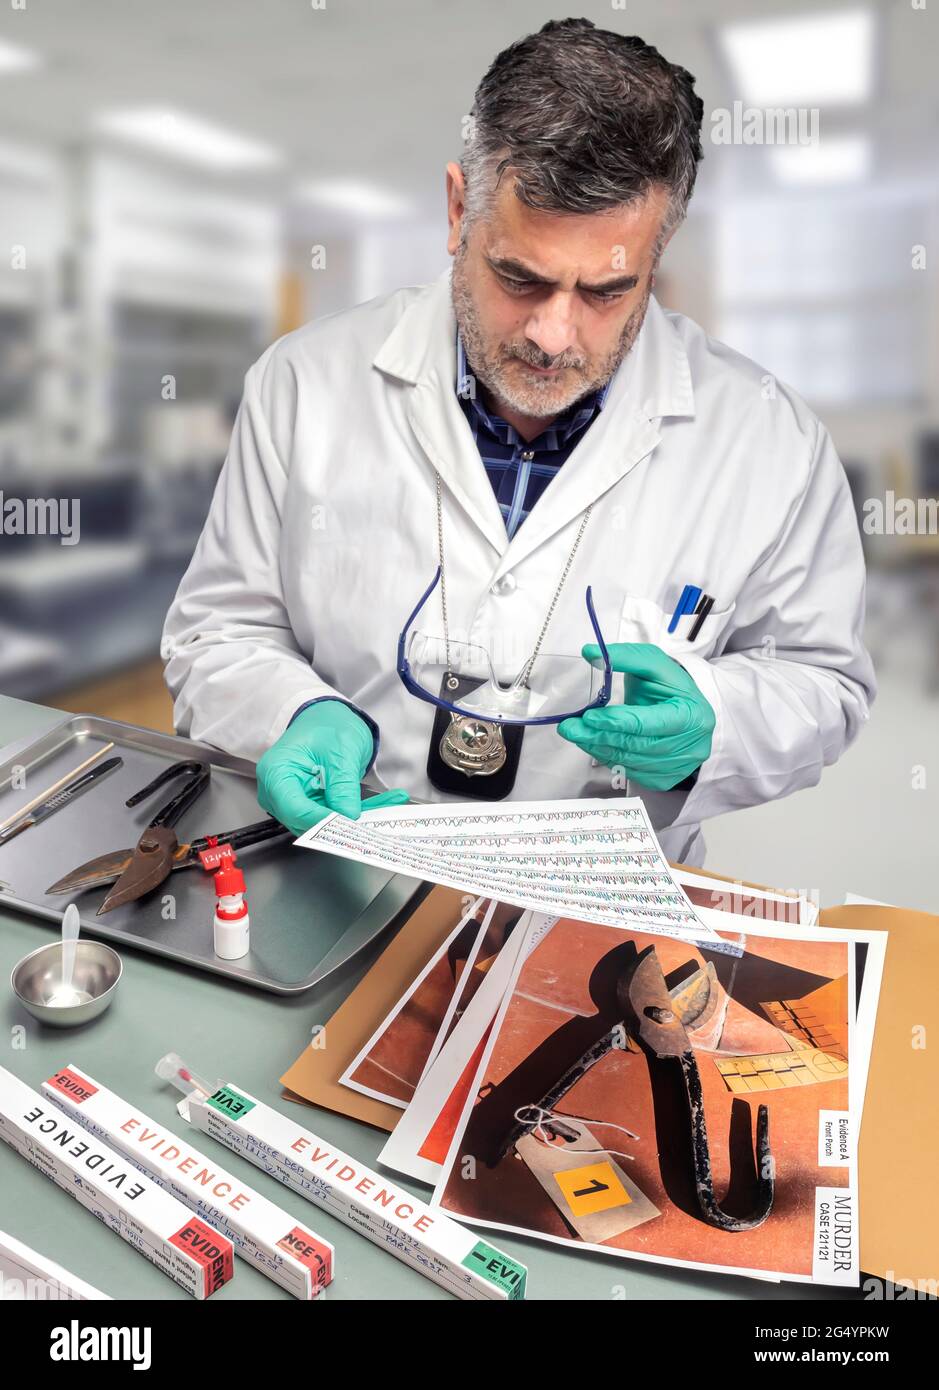 Police scientist checks chromatography analysis for traces of DNA on knife in crime lab, conceptual image Stock Photo